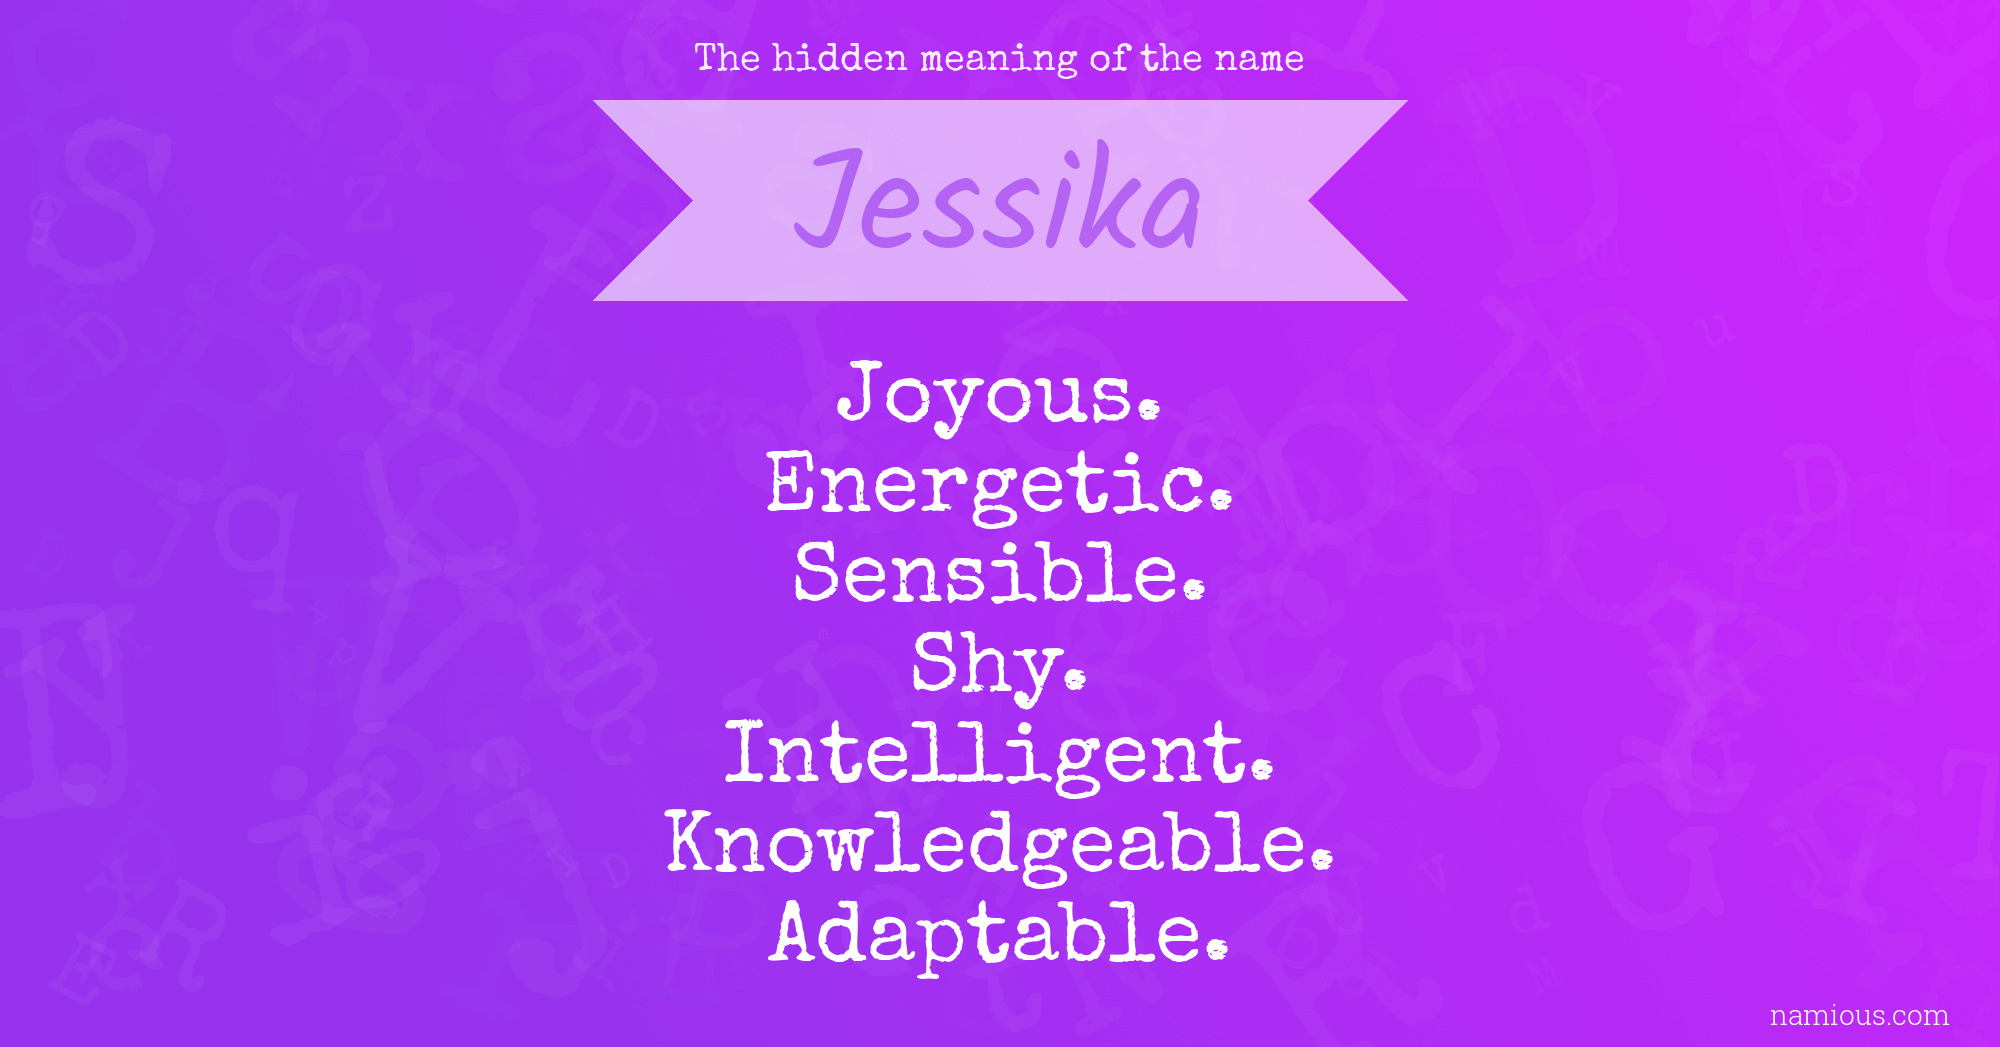 The hidden meaning of the name Jessika